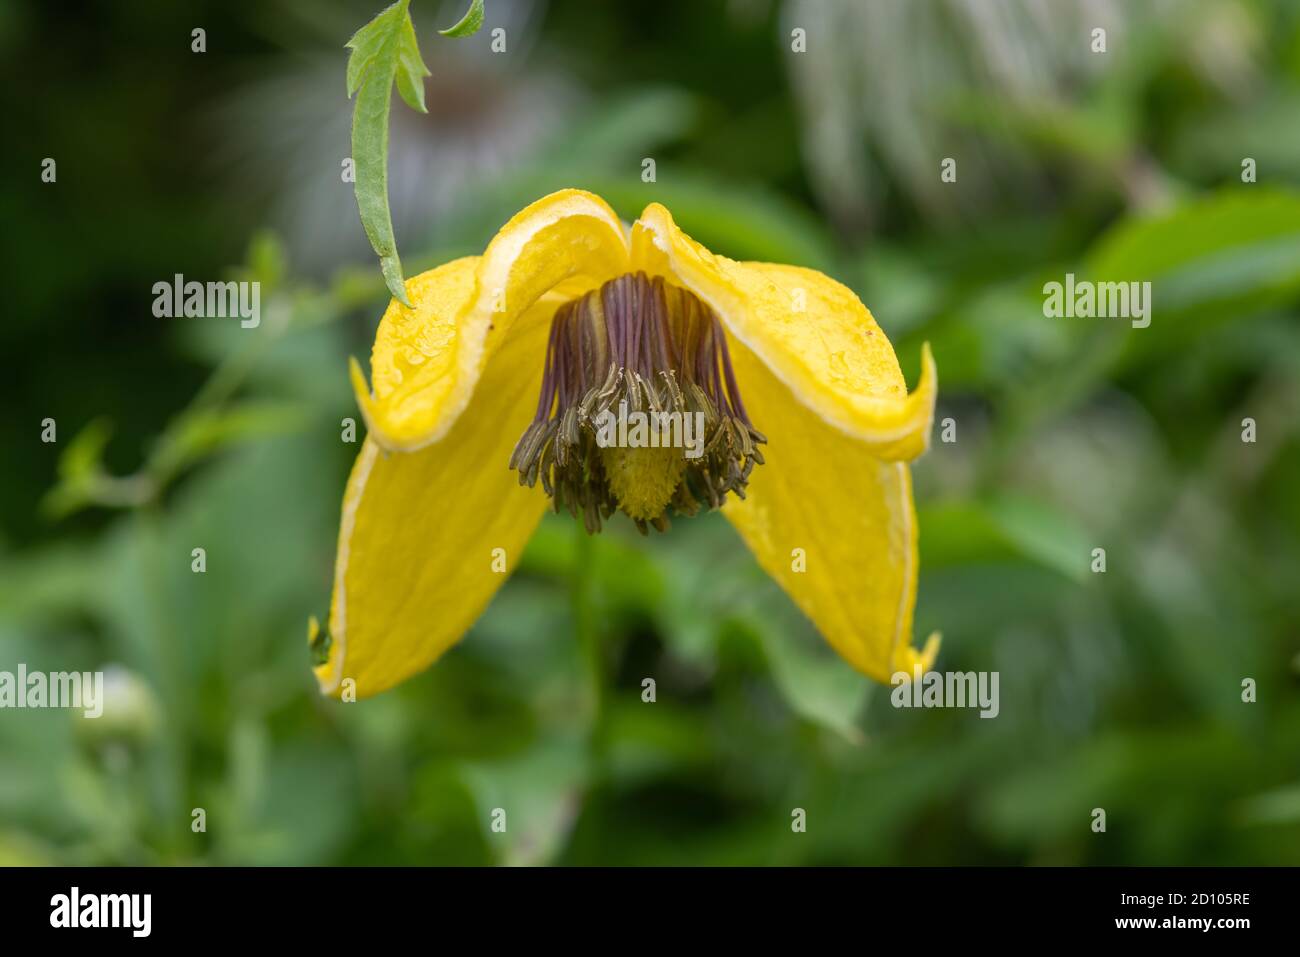 Close up of a yellow downy clematis (clematis macropetala) flower in bloom Stock Photo